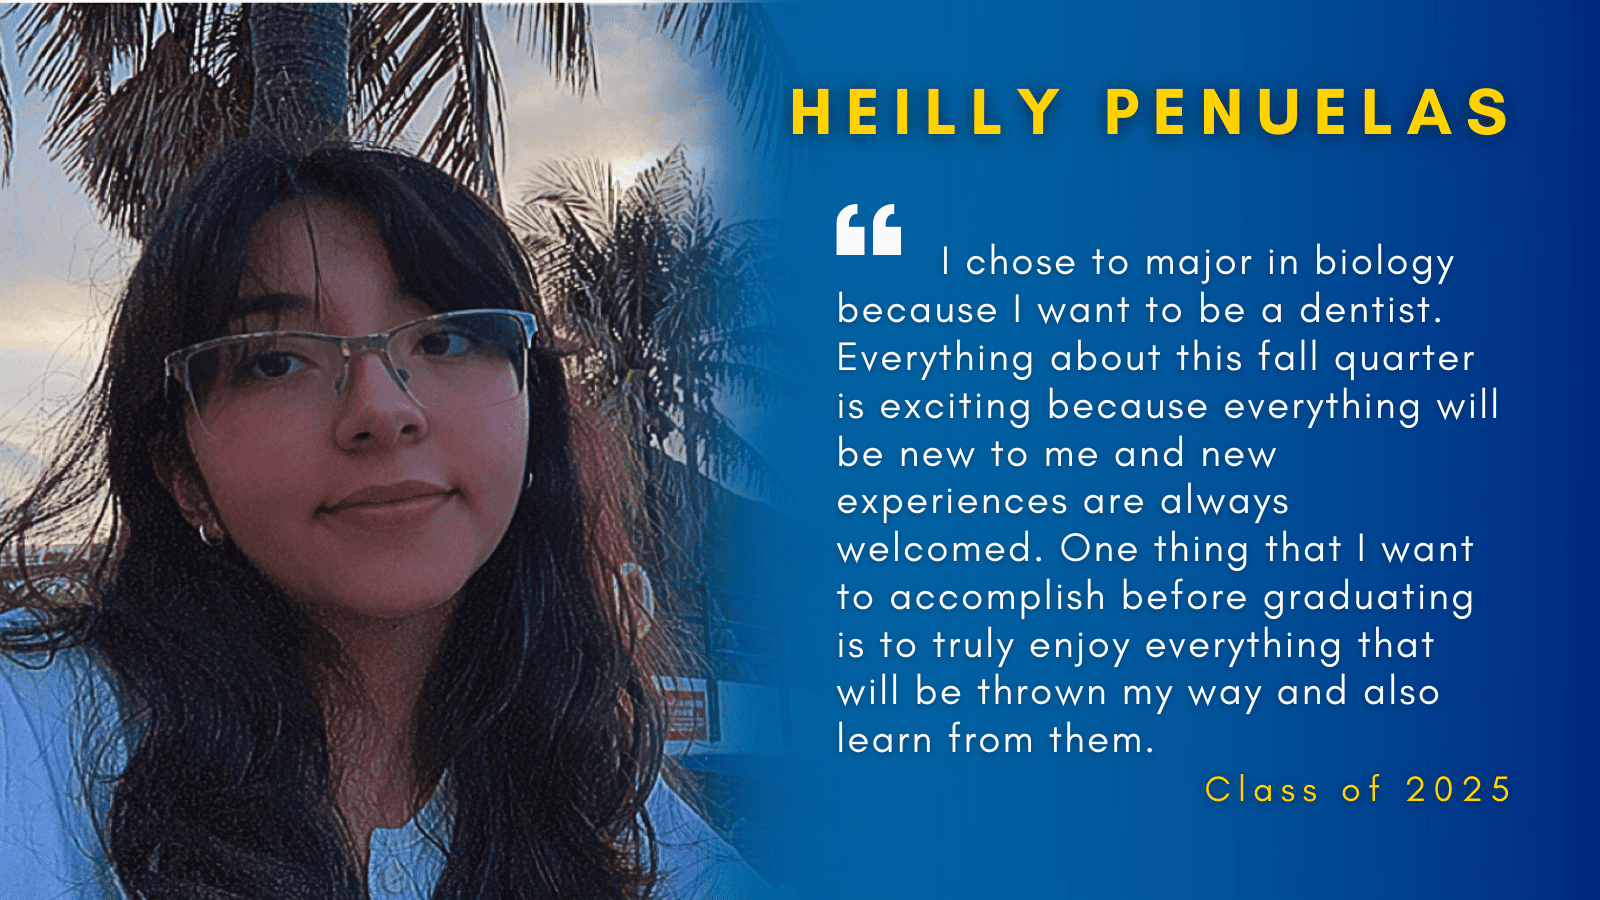 Image of Heilly Penuelas with her quote.